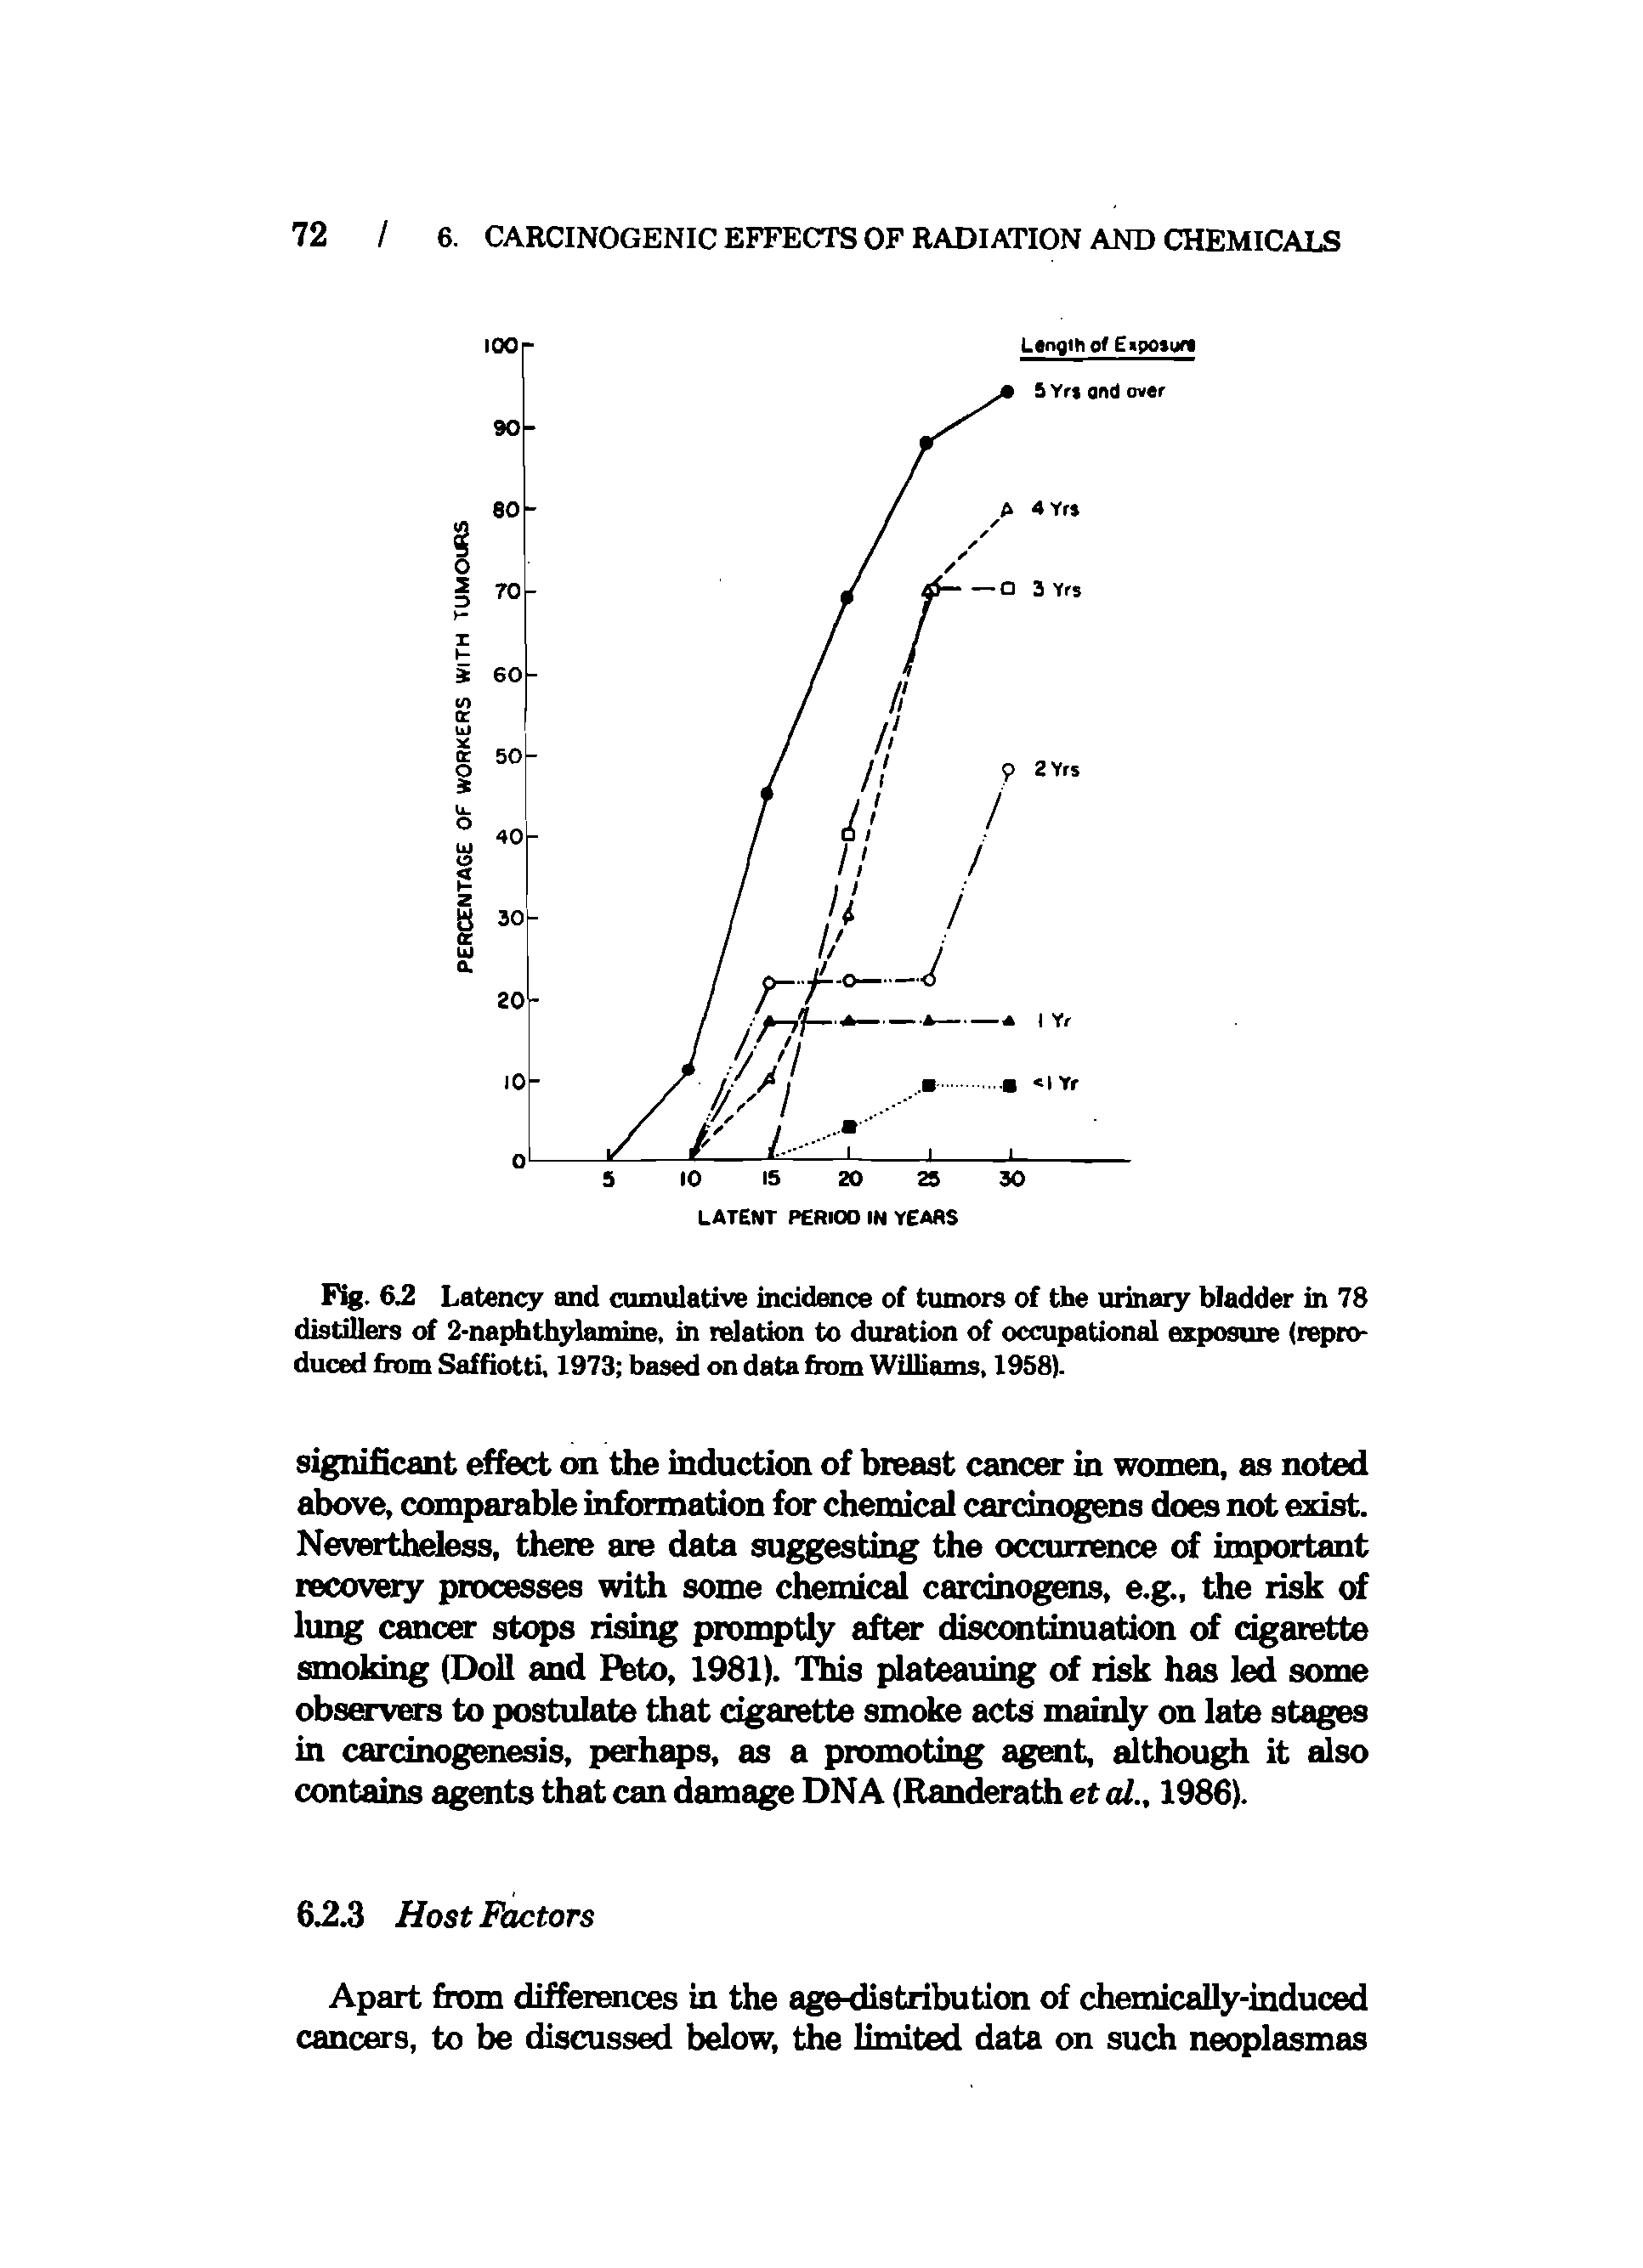 Fig. 6.2 Lateiu and cumulative incidence of tumors of the urinary bladder in 78 distillers of 2-naphthylamine, in relation to duration of occupational exposure (reproduced from Saffiotti. 1973 based on data from Williams, 1958).